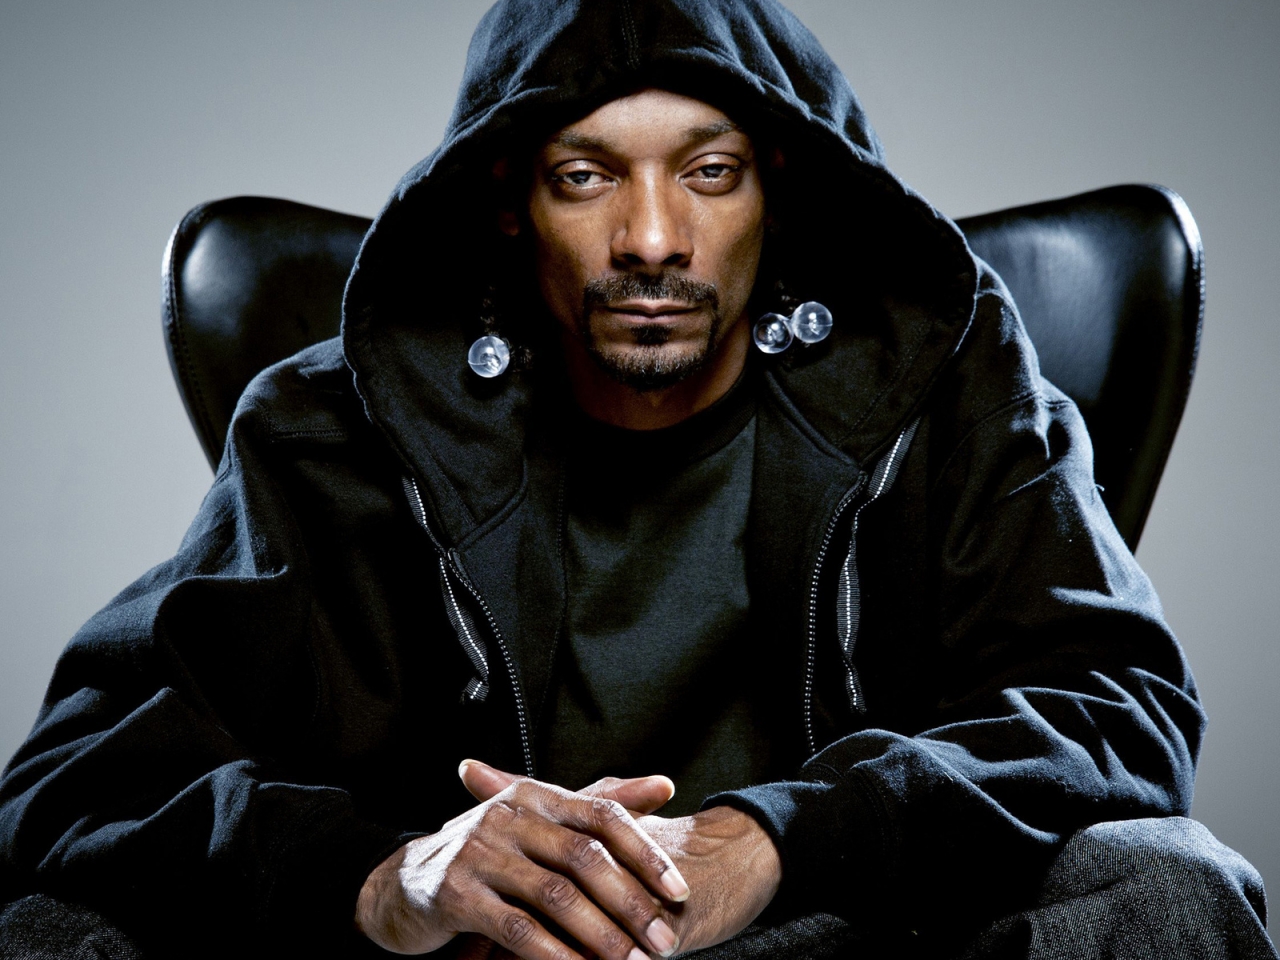 Snoop Dog for 1280 x 960 resolution